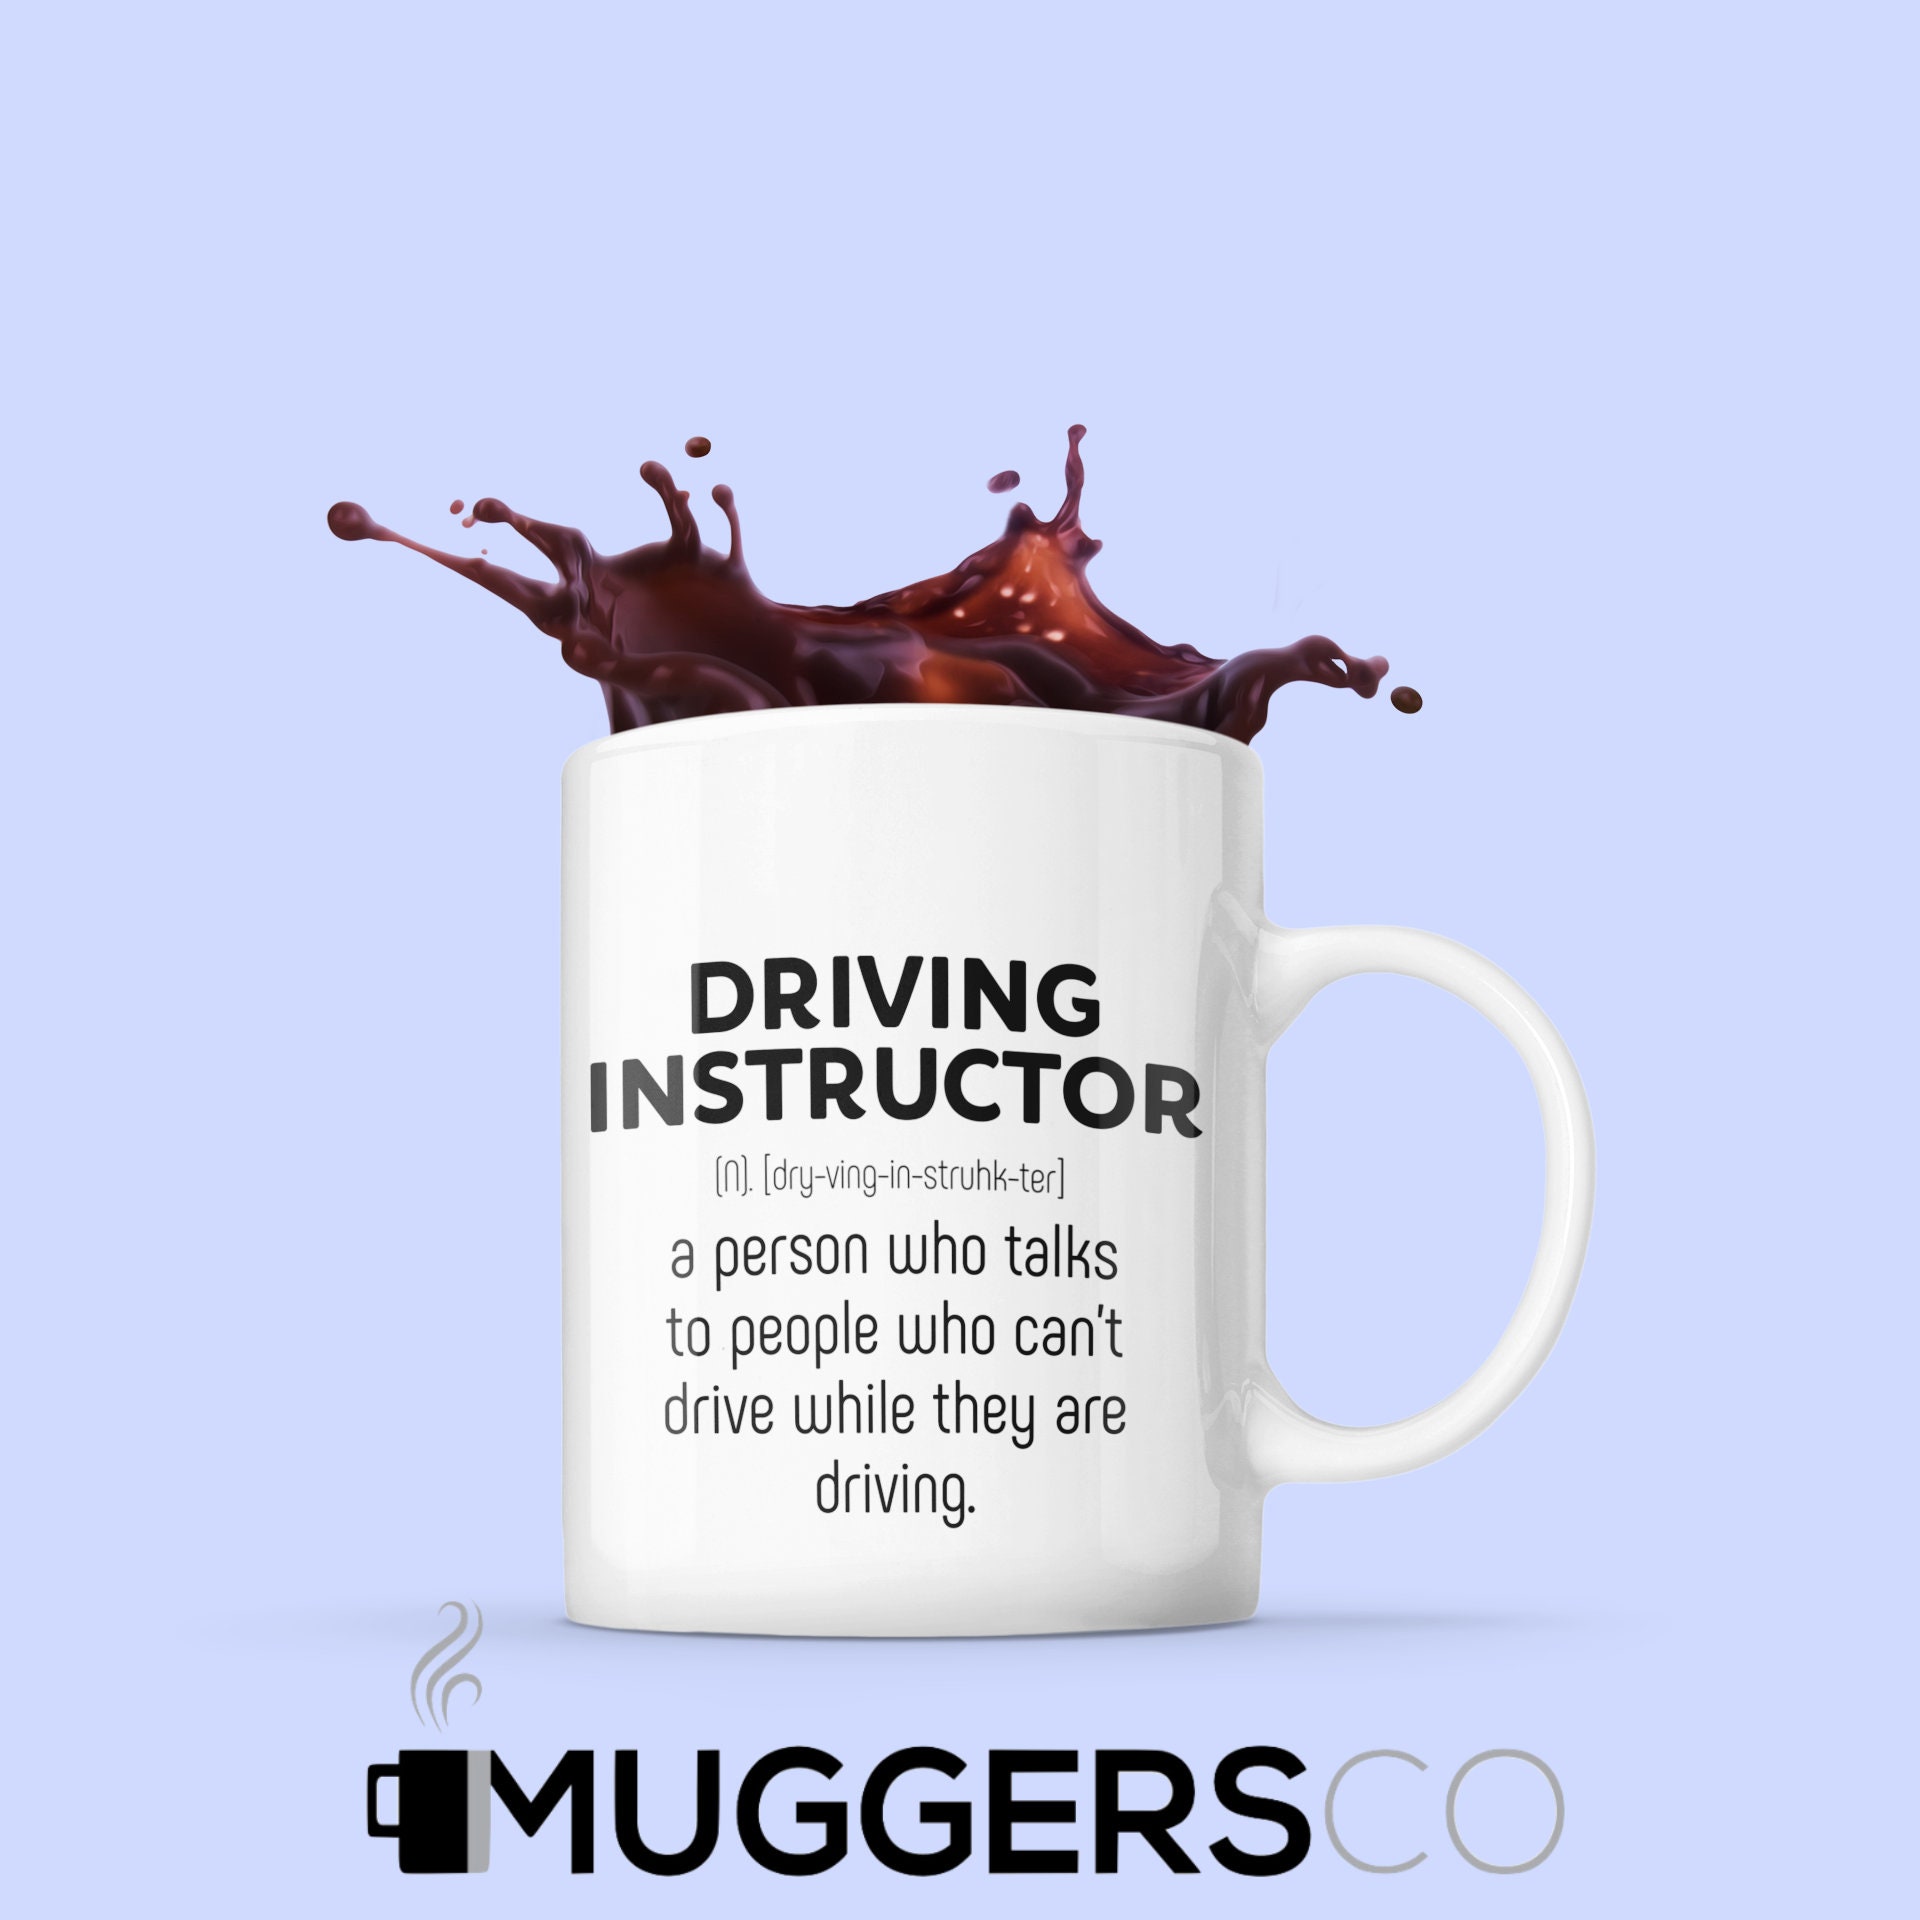 Delivery Driver Definition Funny Delivery Driver Coffee Mug Gift 